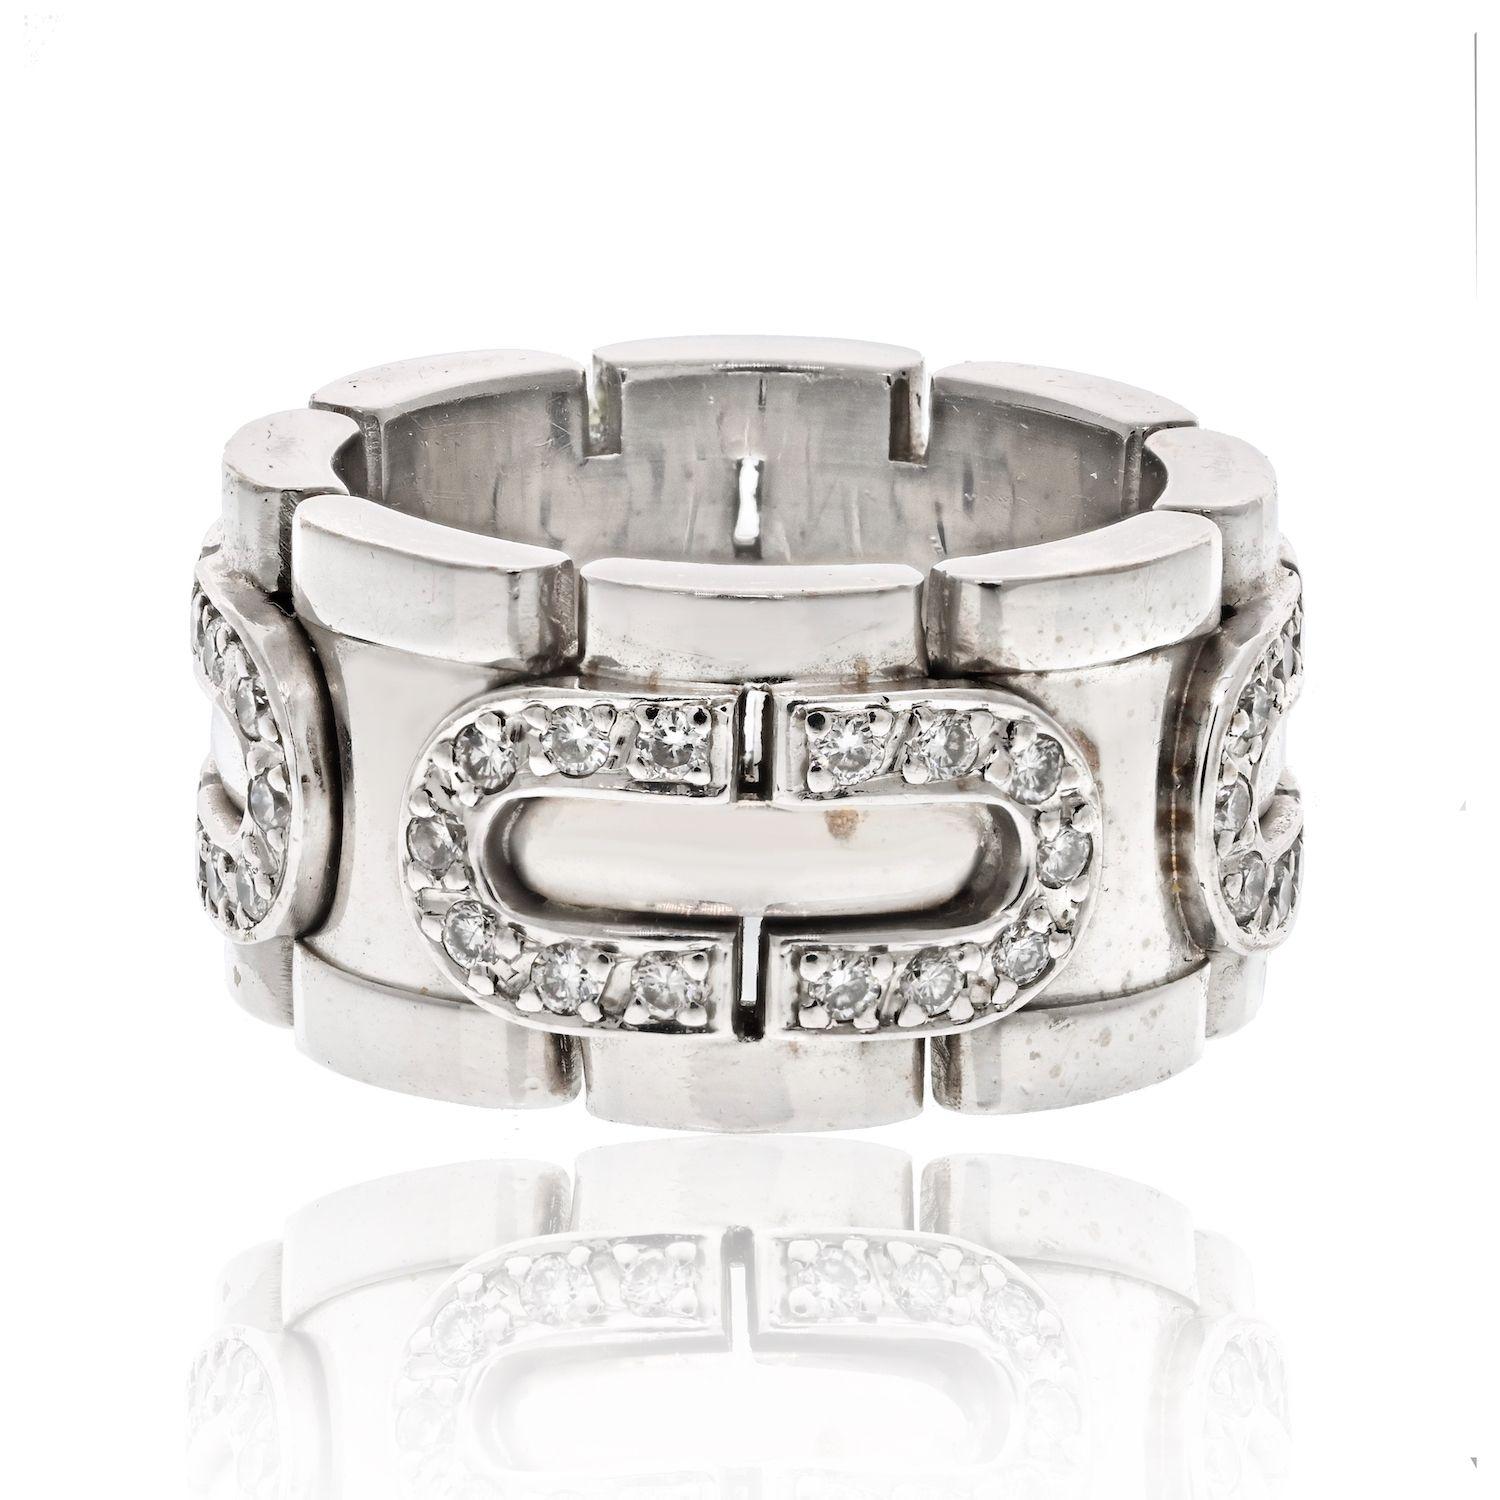 Women's Cartier 18K White Gold Panthere Maillon Diamond Ring For Sale